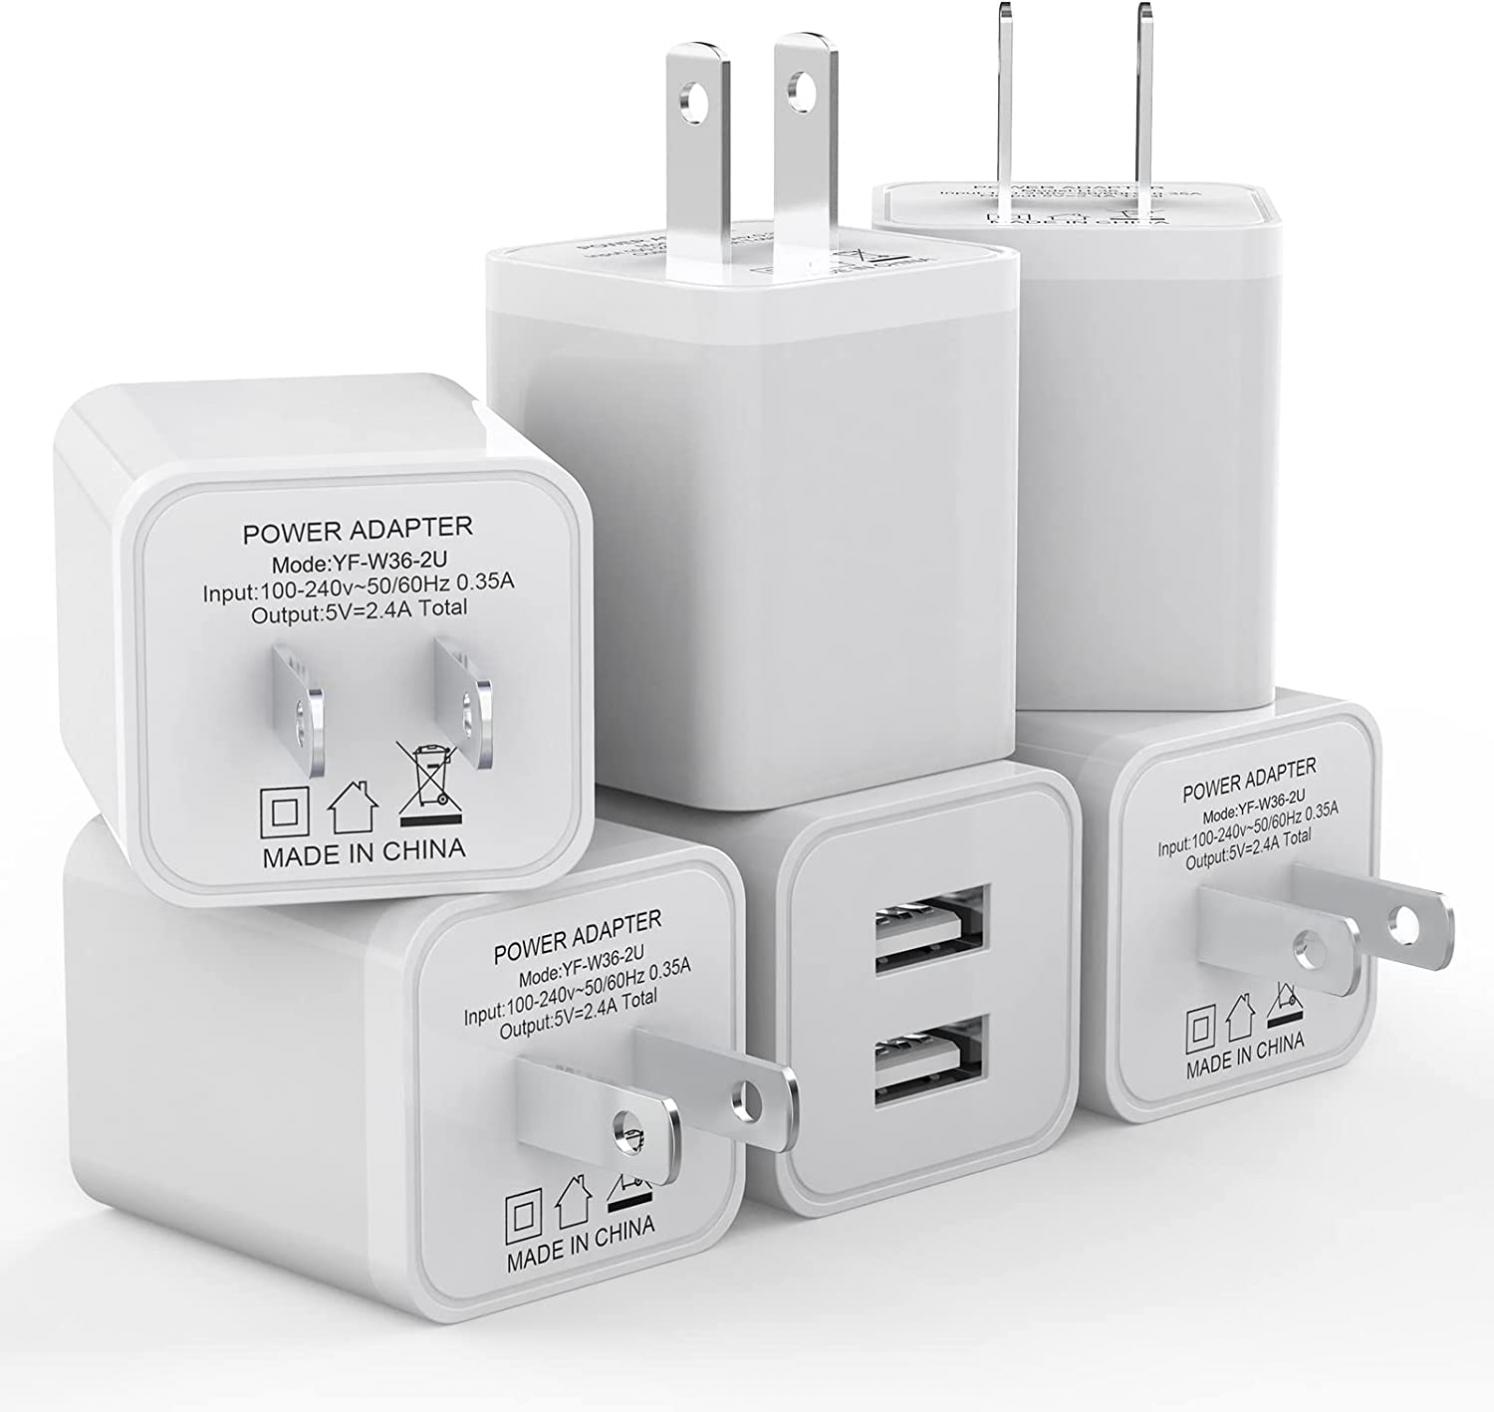 6Pack USB Wall Charger, iGENJUN 2.4A Phone Charger Dual USB Port Cube Power Plug Adapter Fast Wall Charger Block Compatible with iPhone 14/14 Pro/13/13 Pro, Samsung Galaxy, Pixel, LG, Android-White